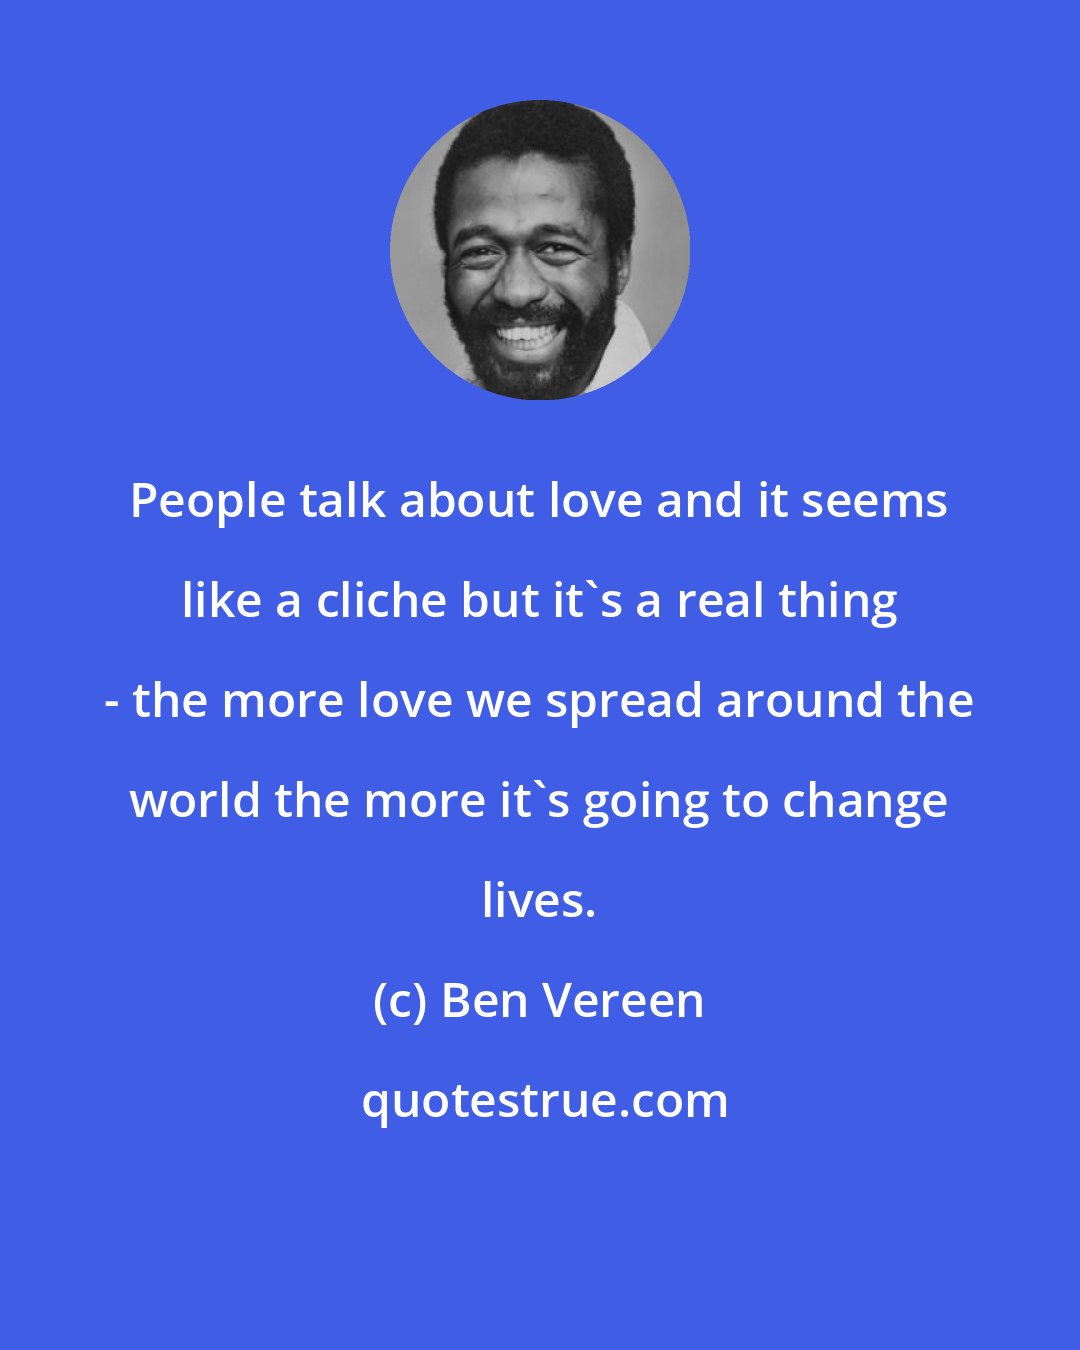 Ben Vereen: People talk about love and it seems like a cliche but it's a real thing - the more love we spread around the world the more it's going to change lives.